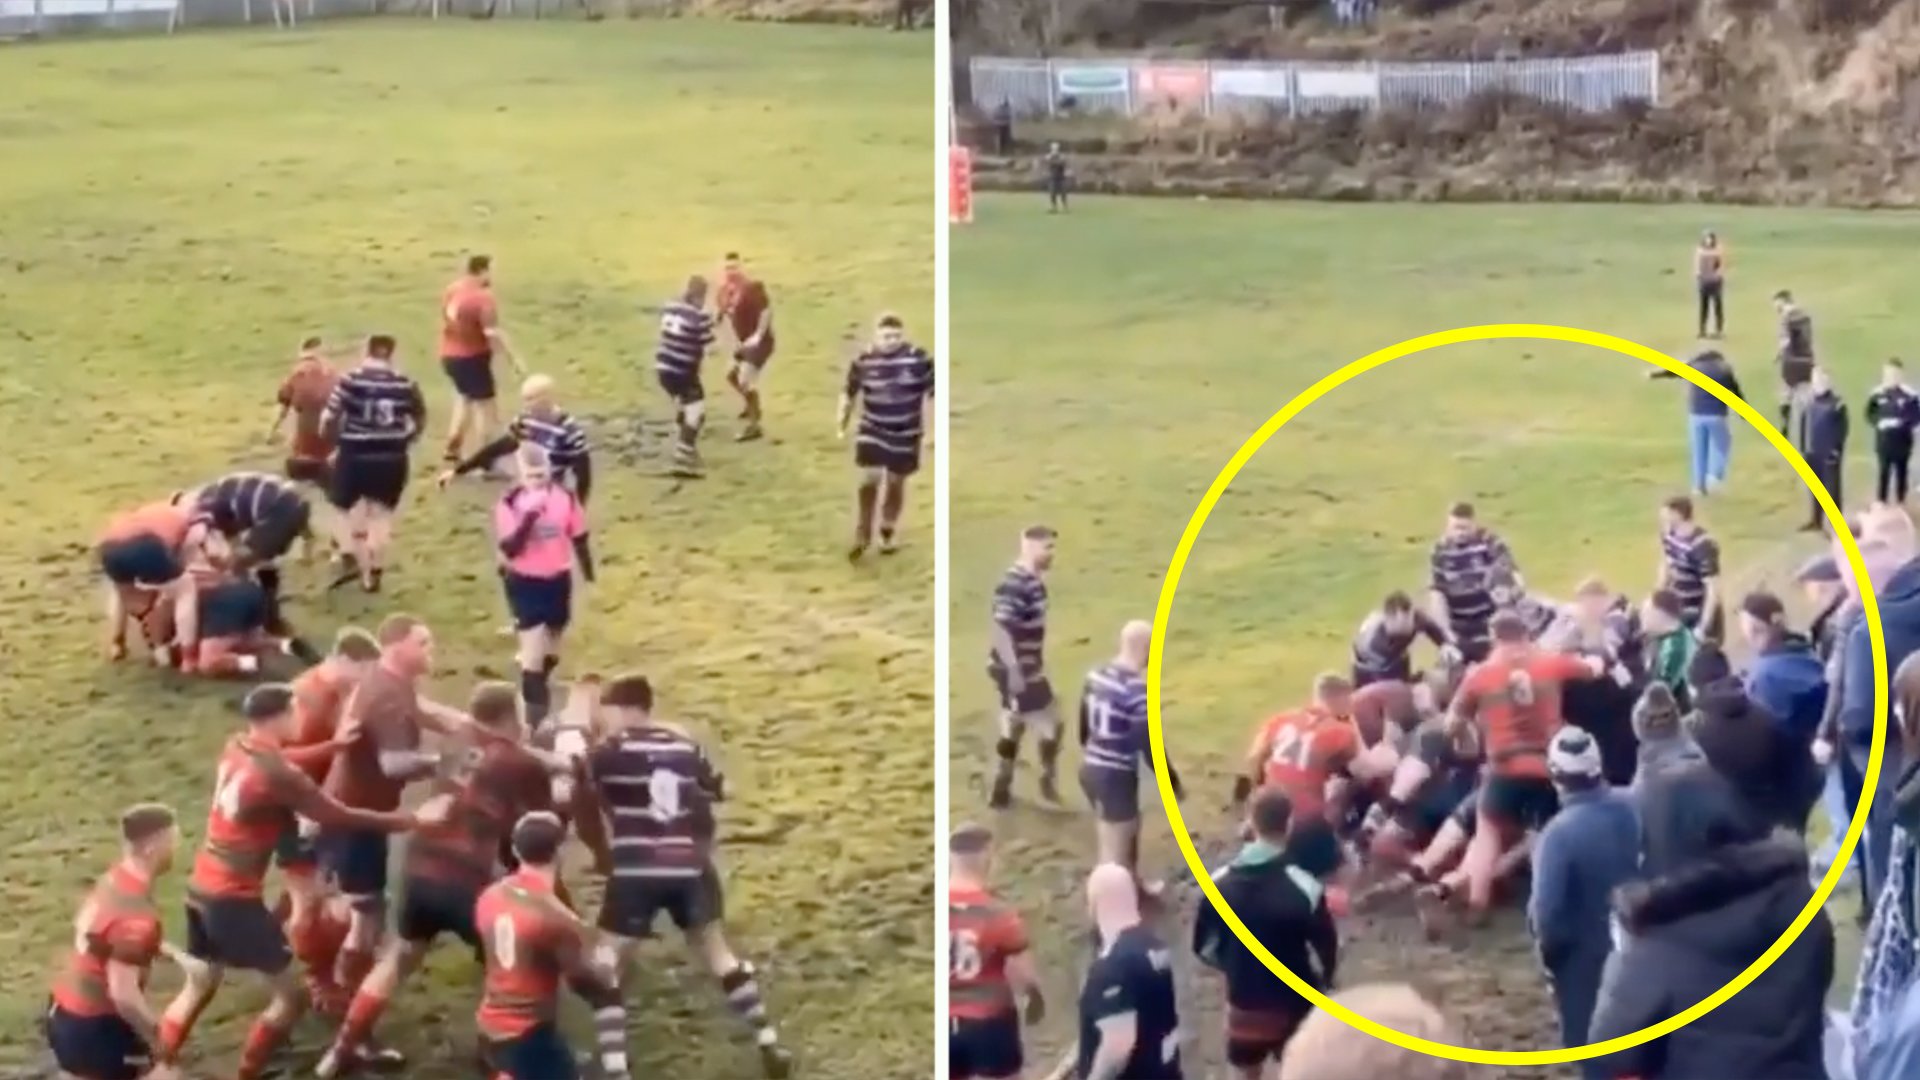 The mother of all brawls broke out somewhere in Wales during a rugby match